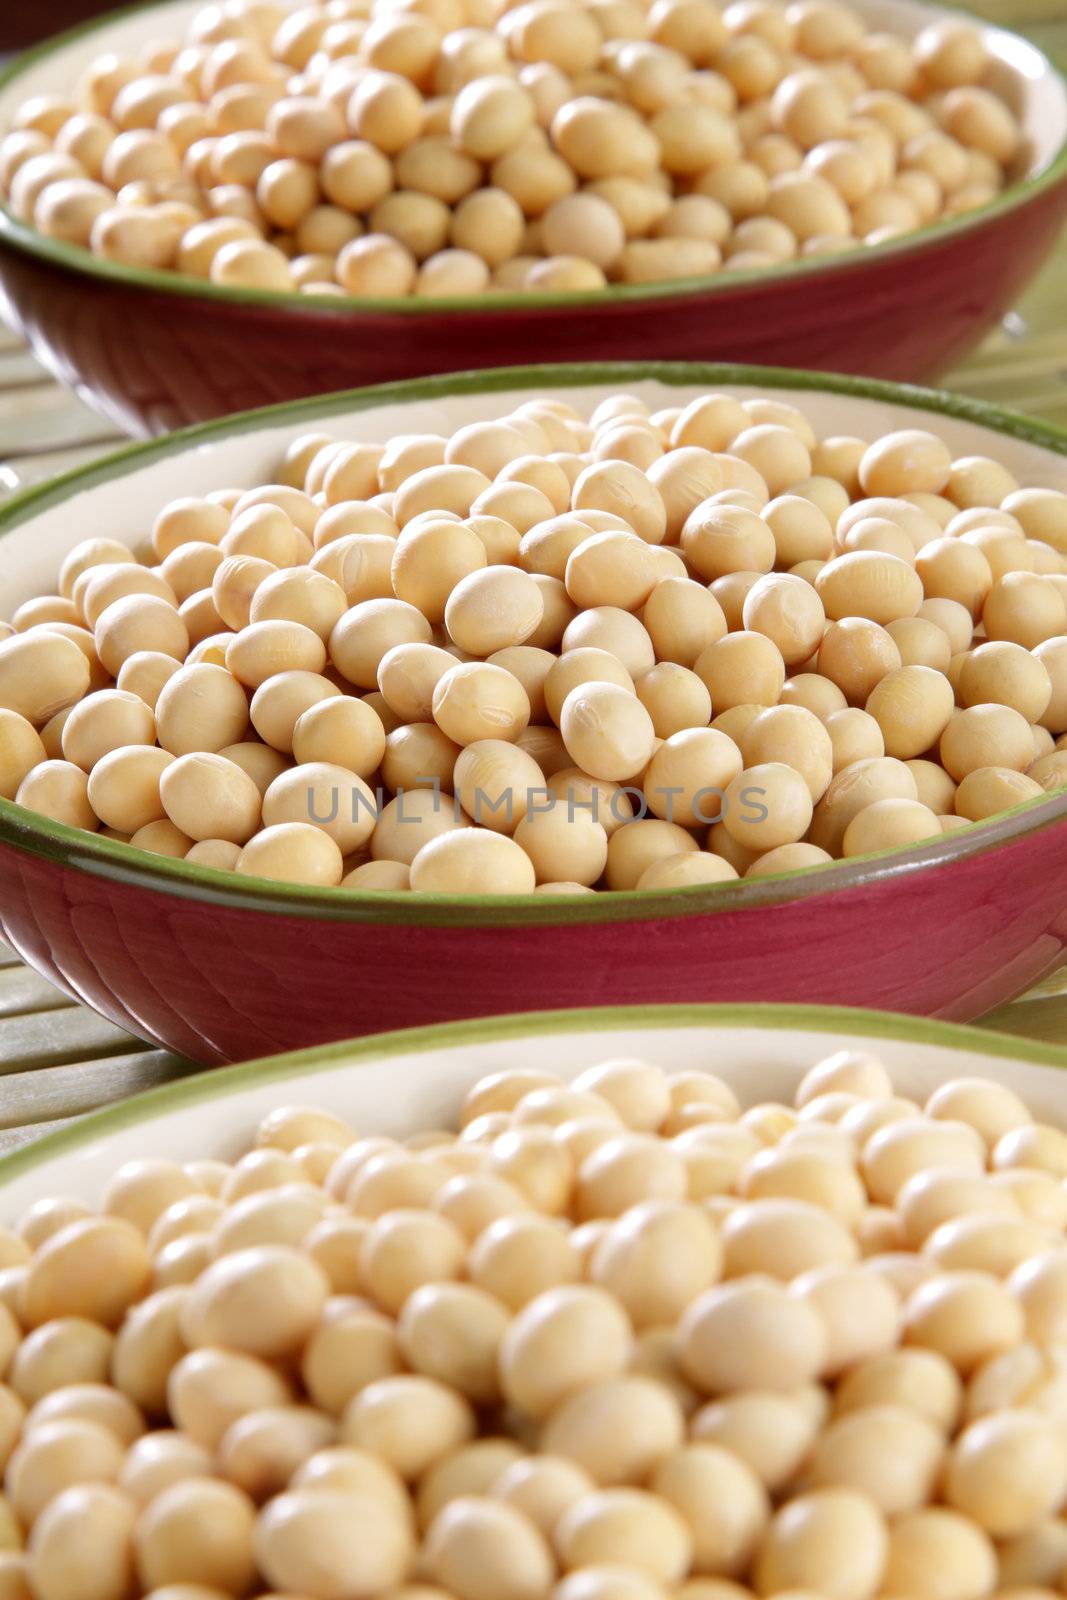 Several bowls of healthy organic raw soybeans.